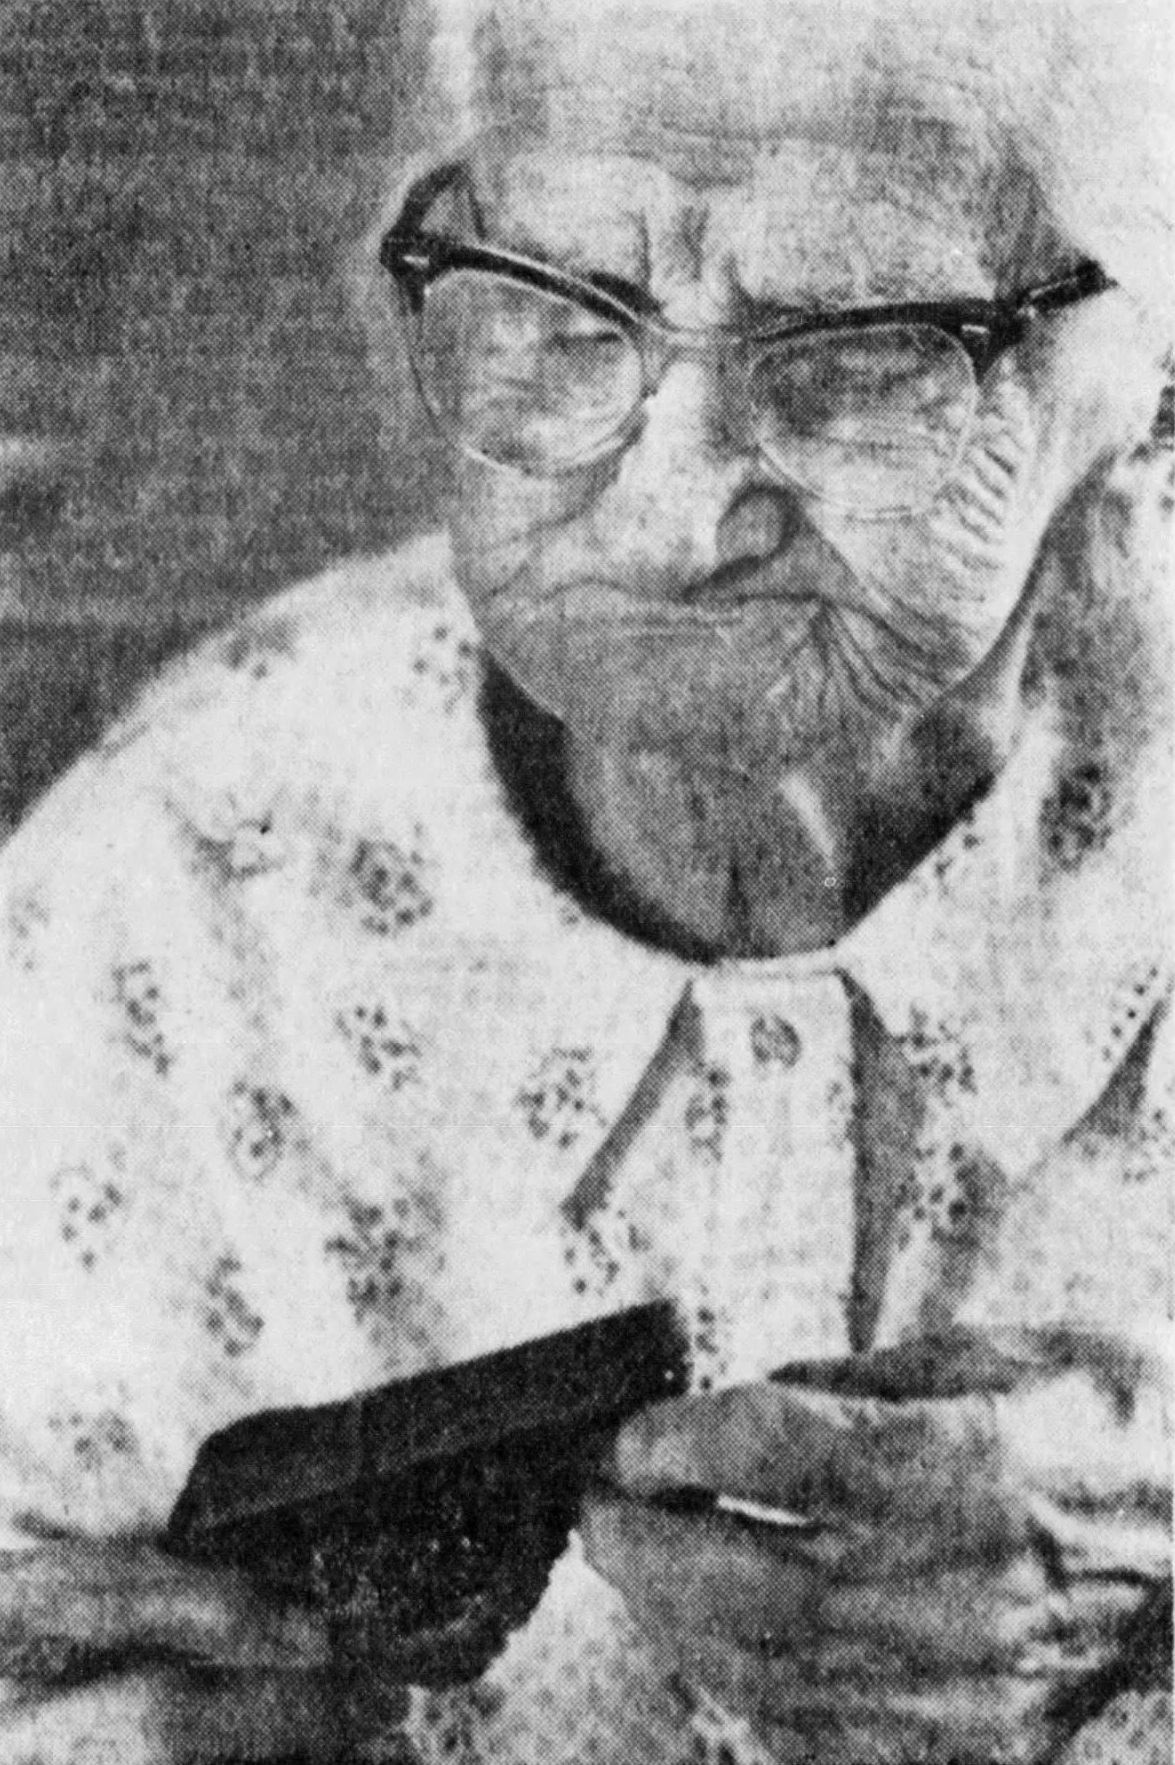 On her 110th birthday in 1982. (Source: The Pittsburgh Press)